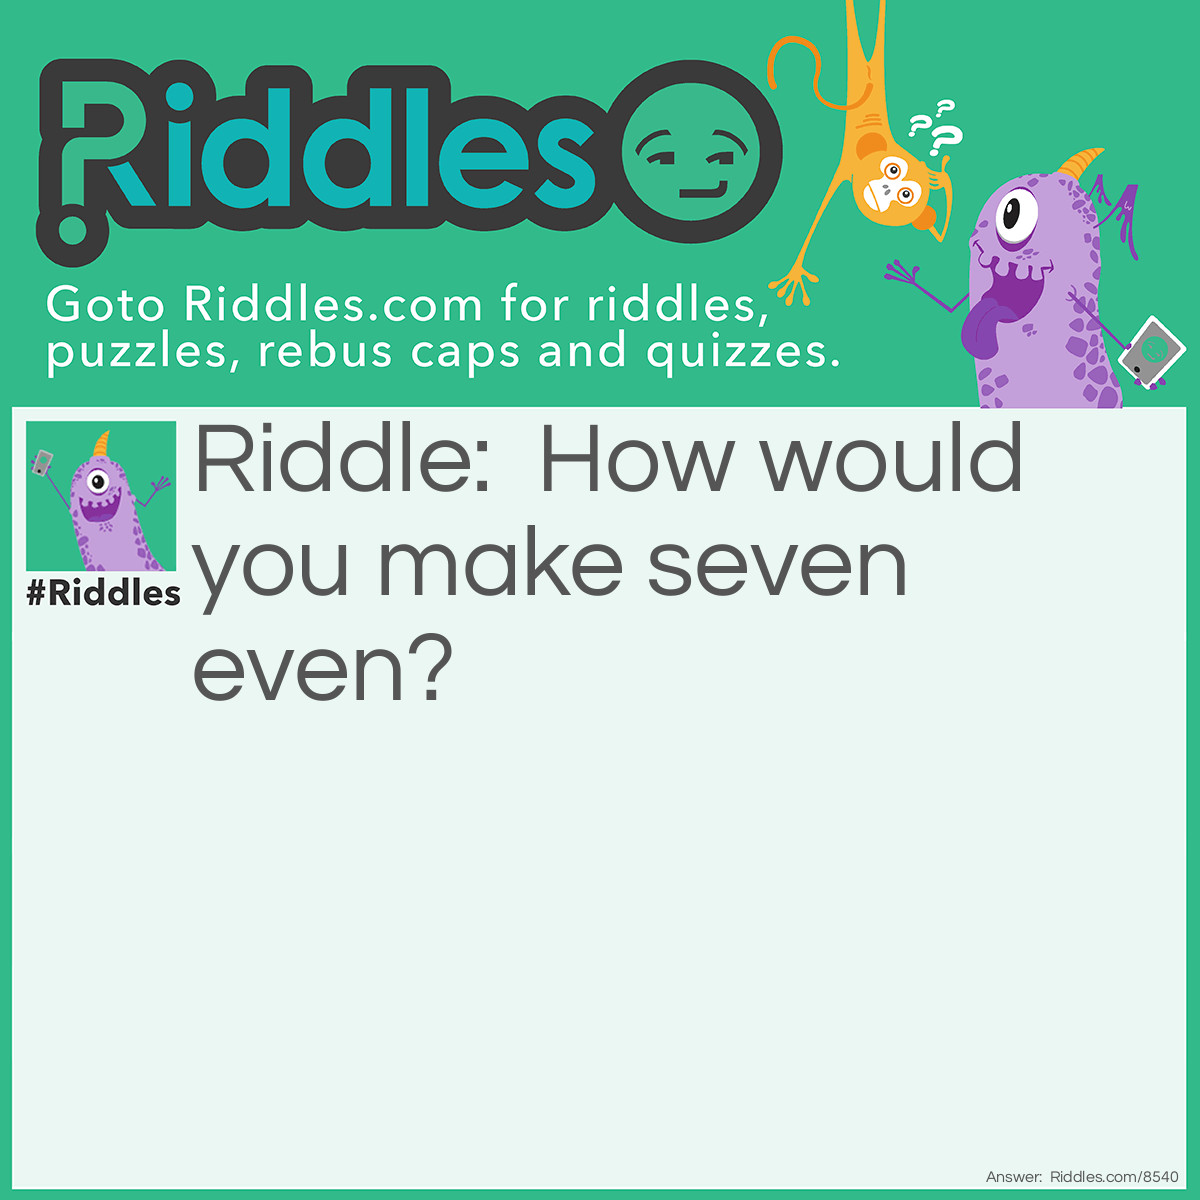 Riddle: How would you make seven even? Answer: Take away the S.